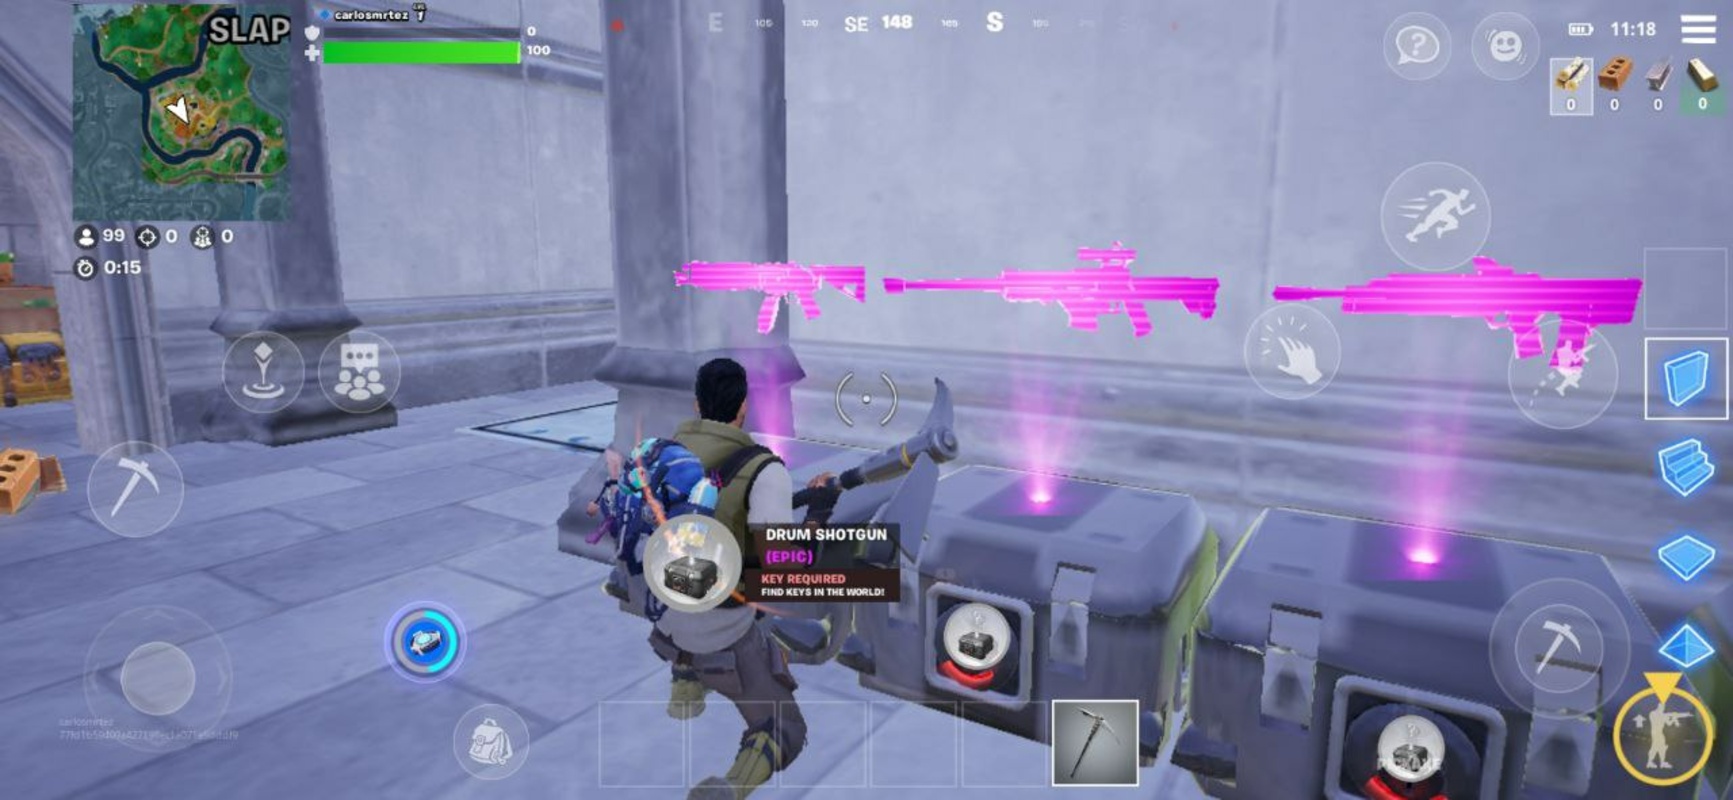 Fortnite 29.10.0-32391220-Android APK for Android Screenshot 13